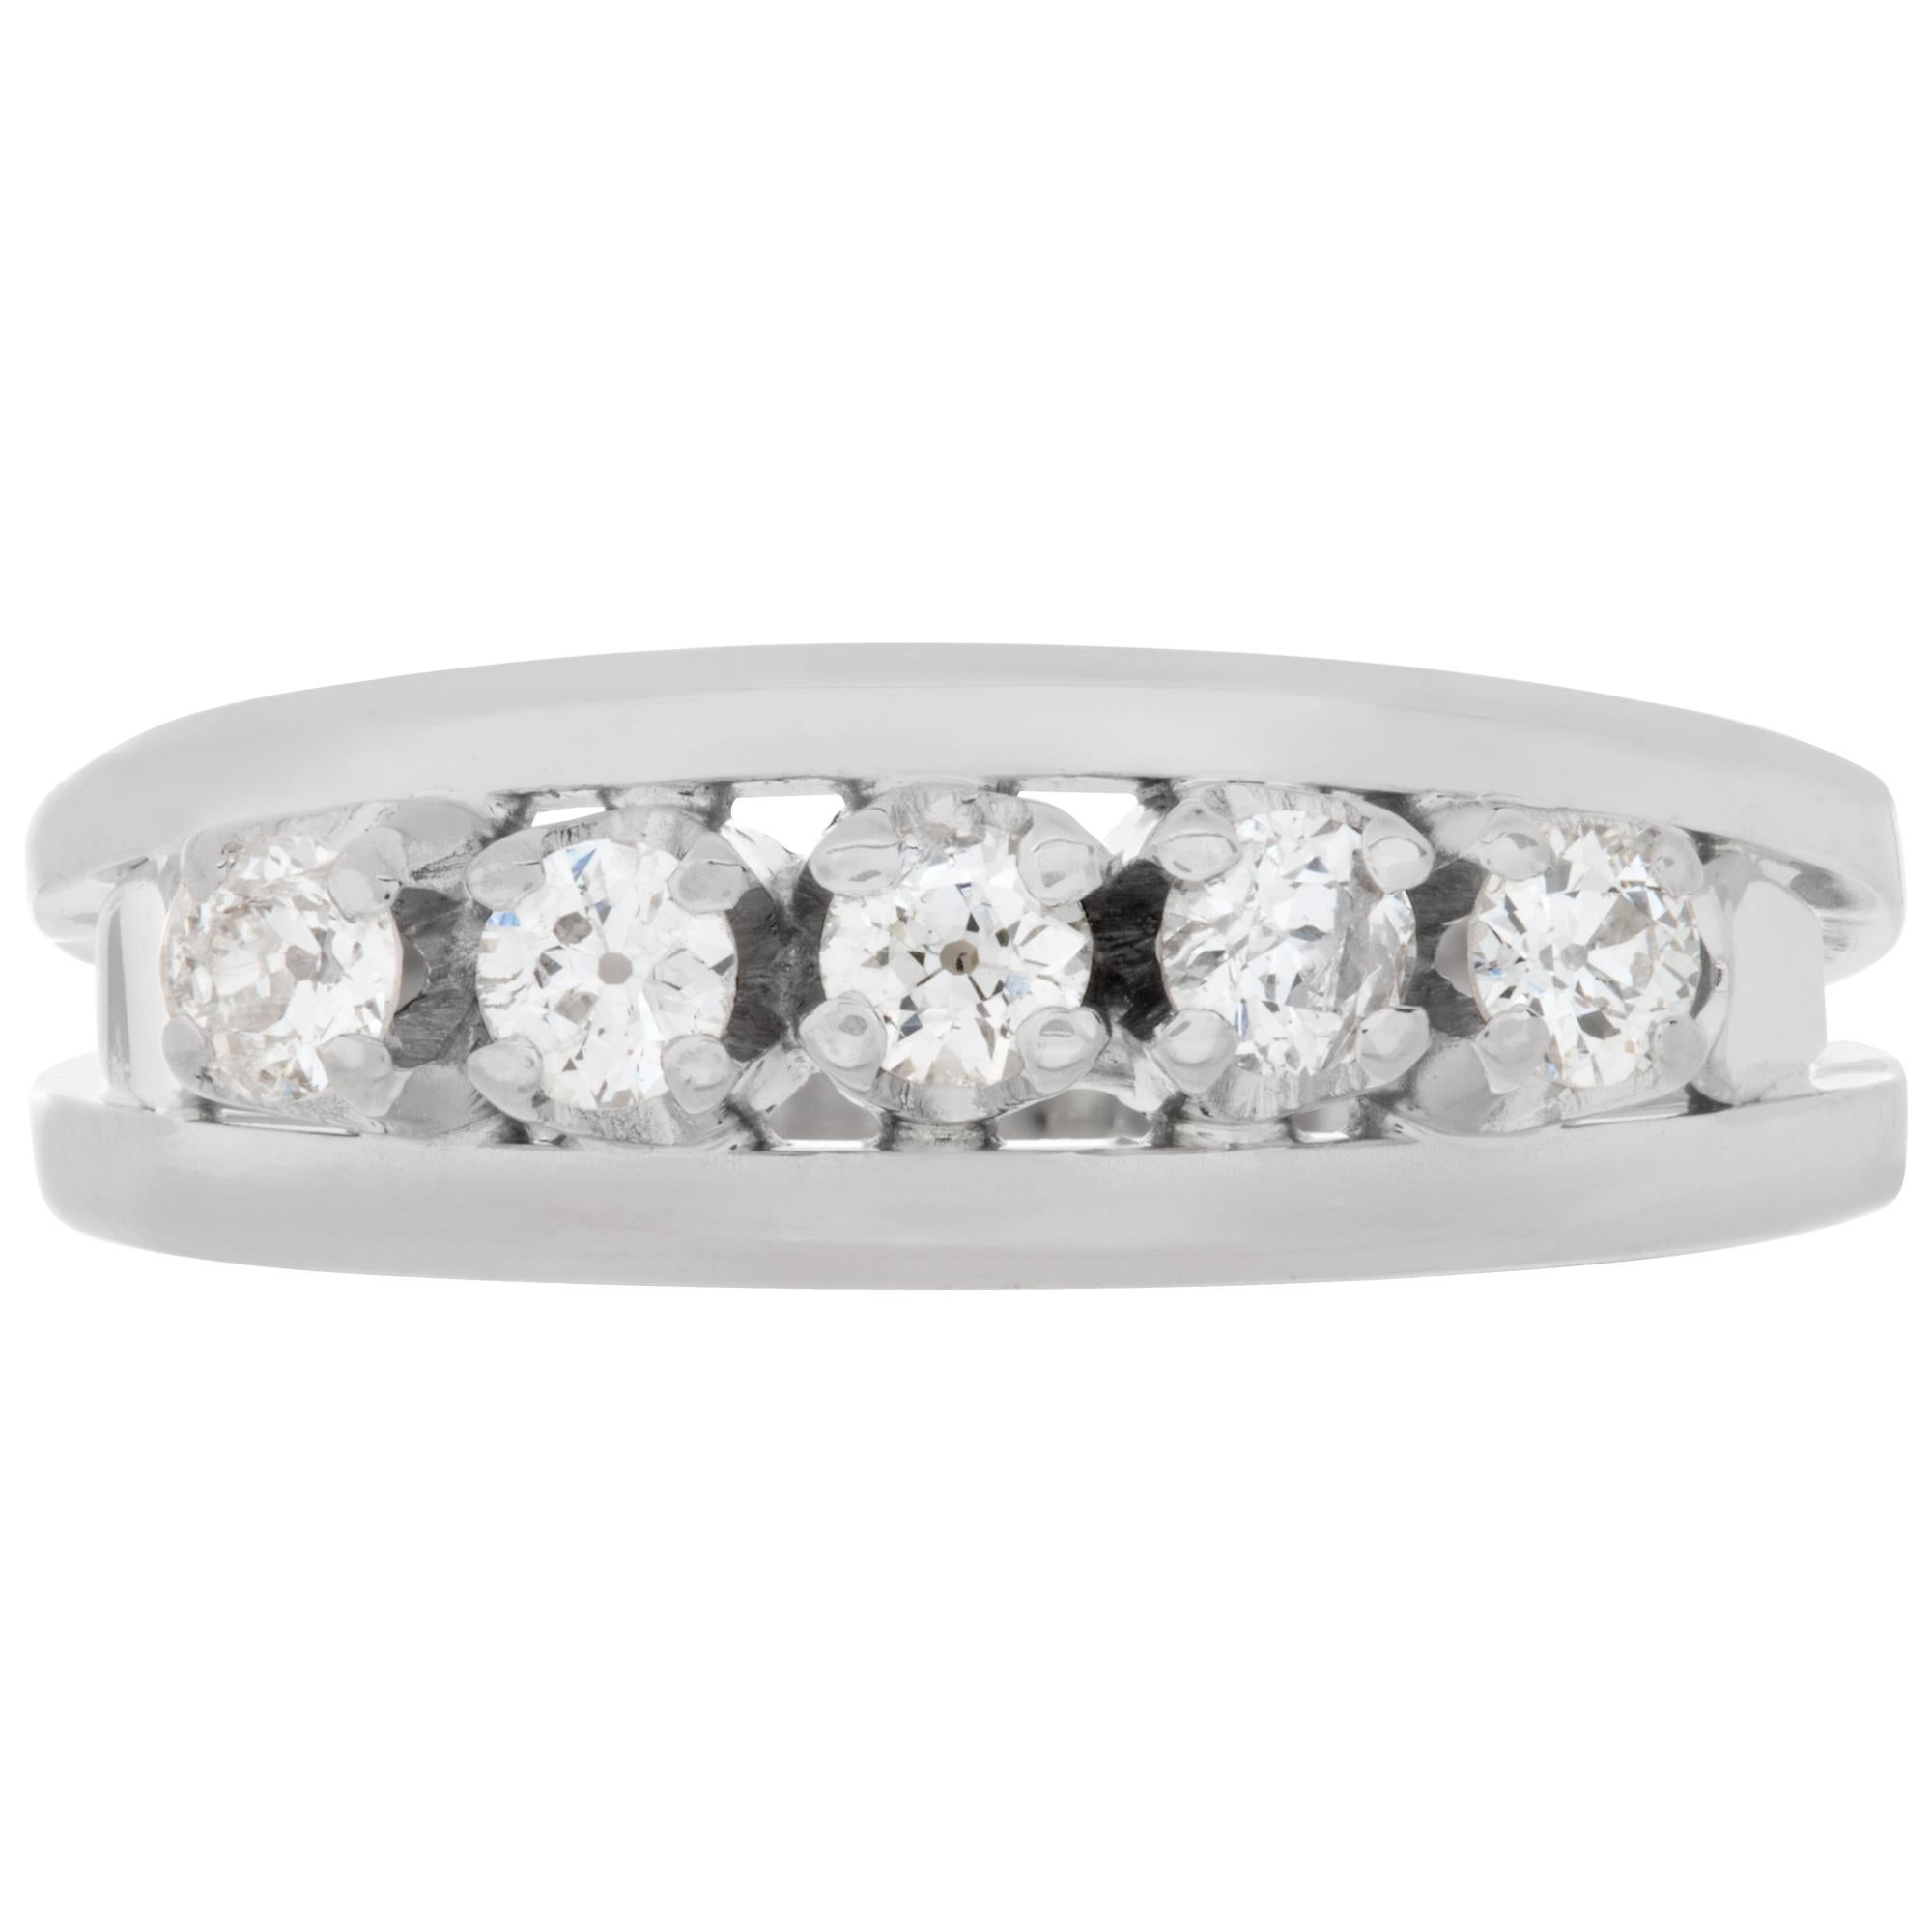 Classic diamond band with approximately 0.35 carat in round brilliant diamonds set in 18k white gold. Size 7.This Diamond ring is currently size 7 and some items can be sized up or down, please ask! It weighs 2.9 pennyweights and is 18k White Gold.